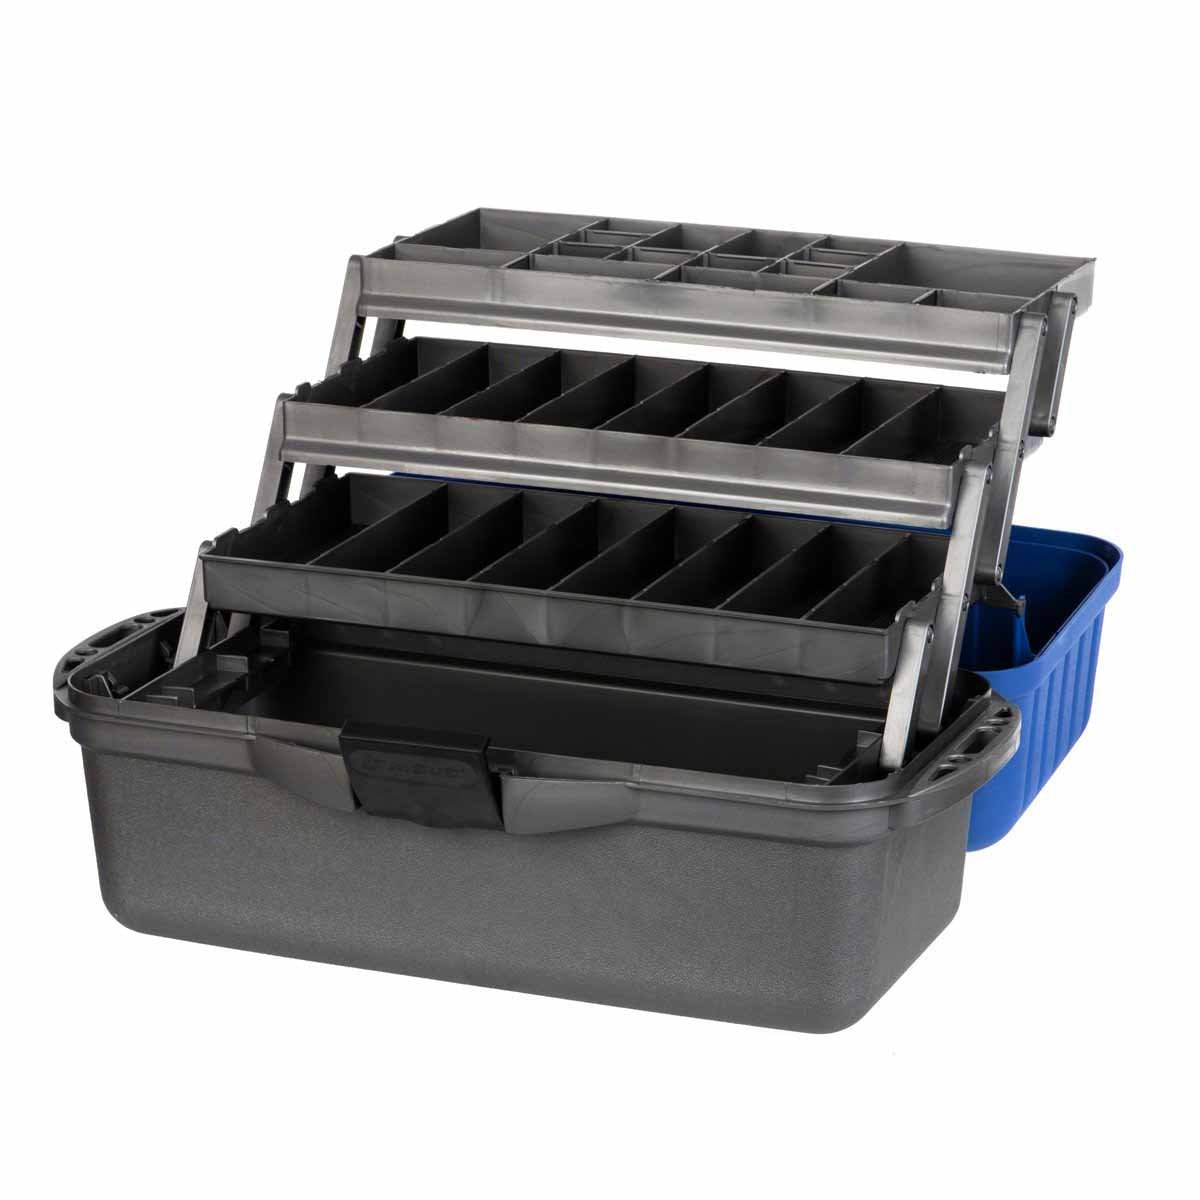 Fishing Tackle Box 3 Fold Out Multi-Tier Trays Fishing Gear buy with  delivery